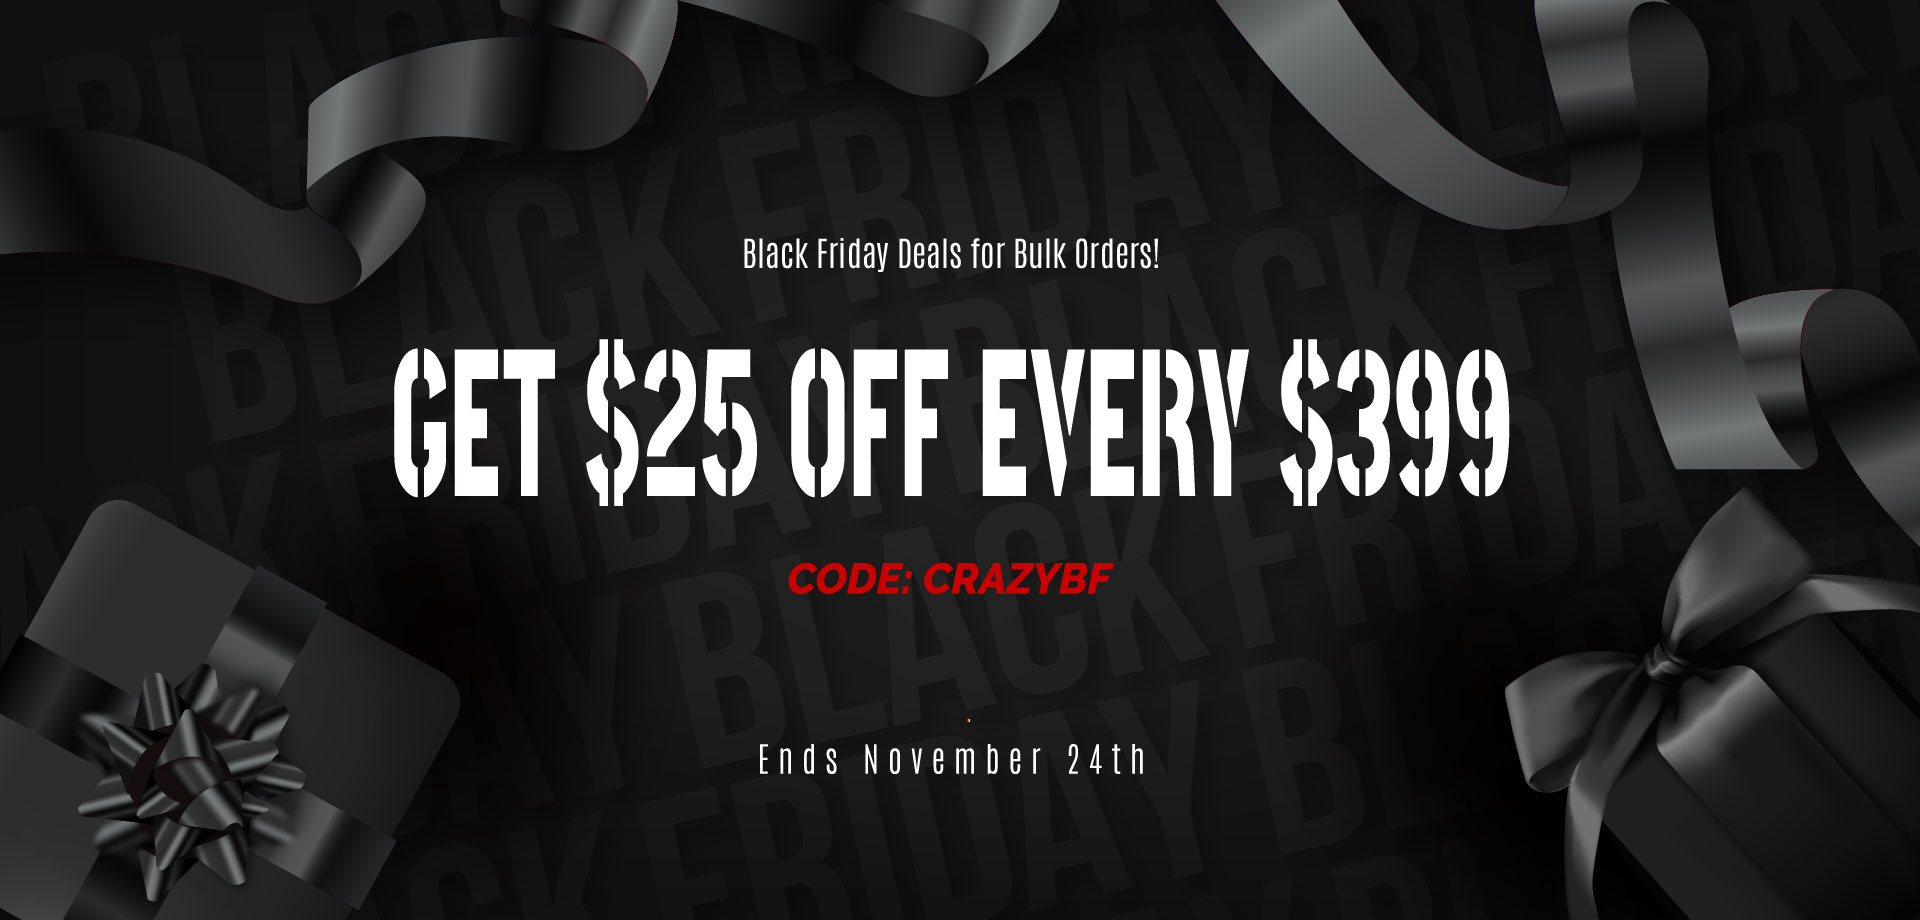 Black Friday landing page banner PC